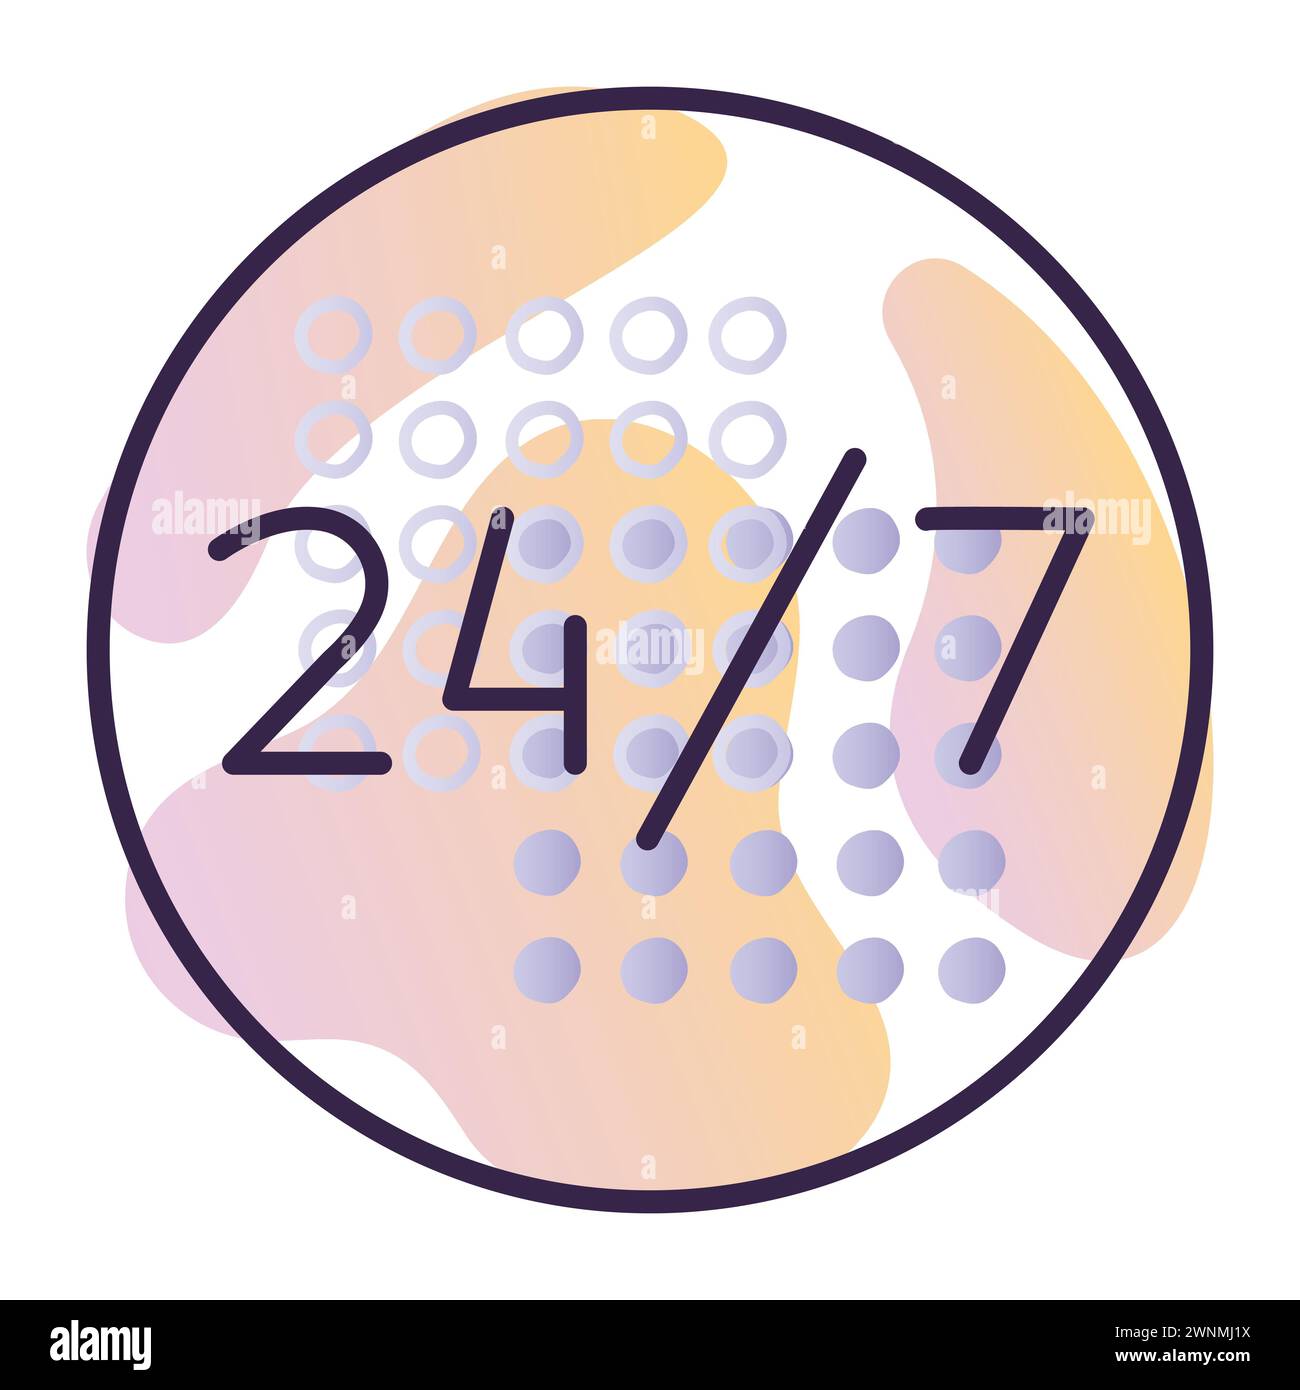 24 hour round the clock work, dark blue line vector icon with gradient background Stock Vector